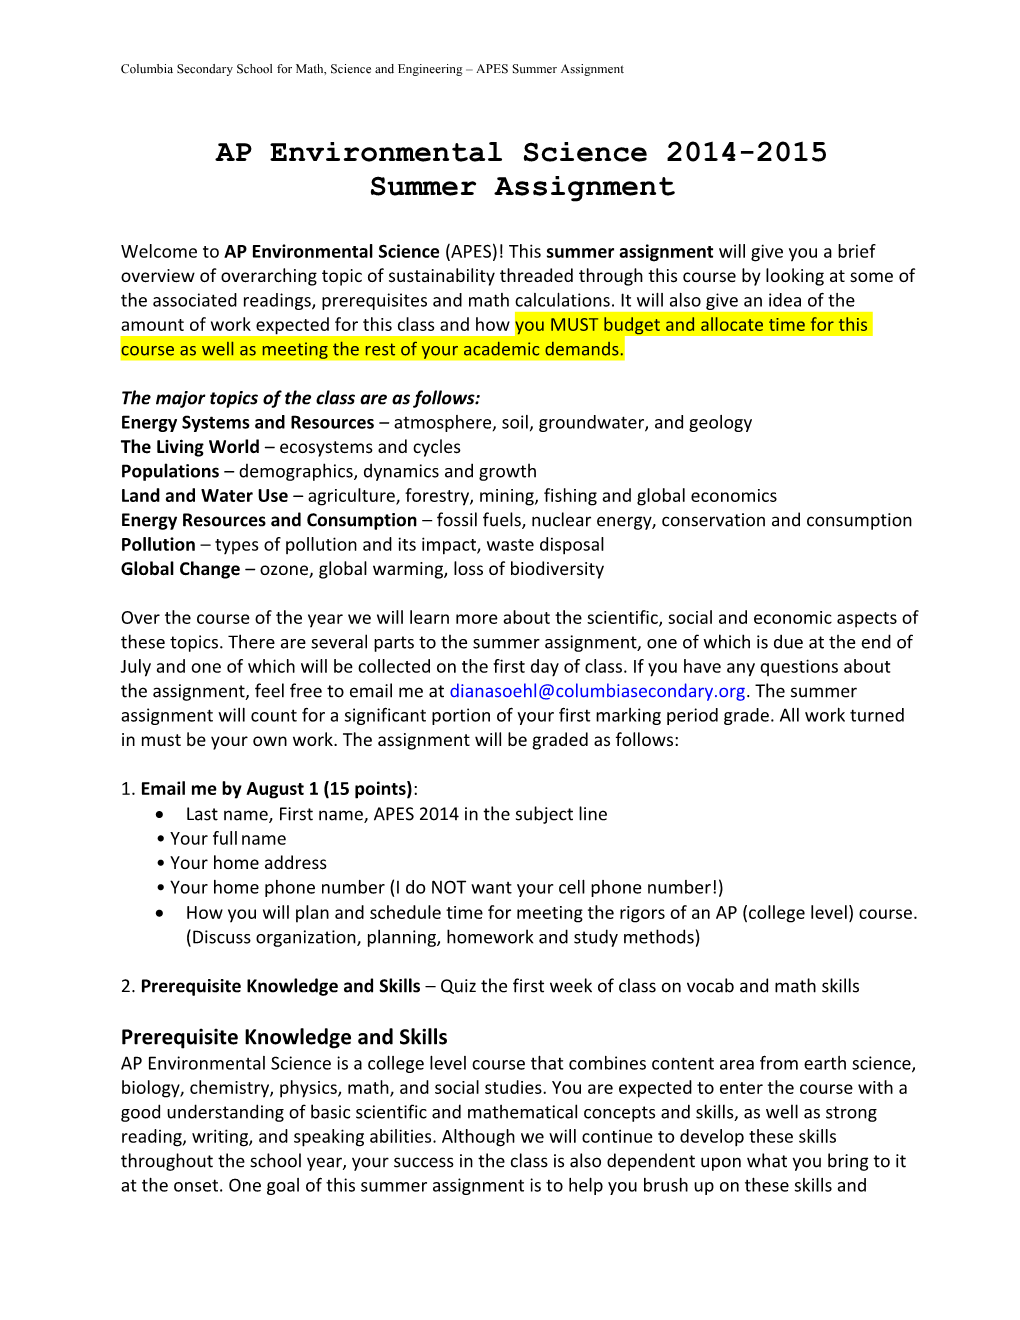 Columbia Secondary School for Math, Science and Engineering APES Summer Assignment